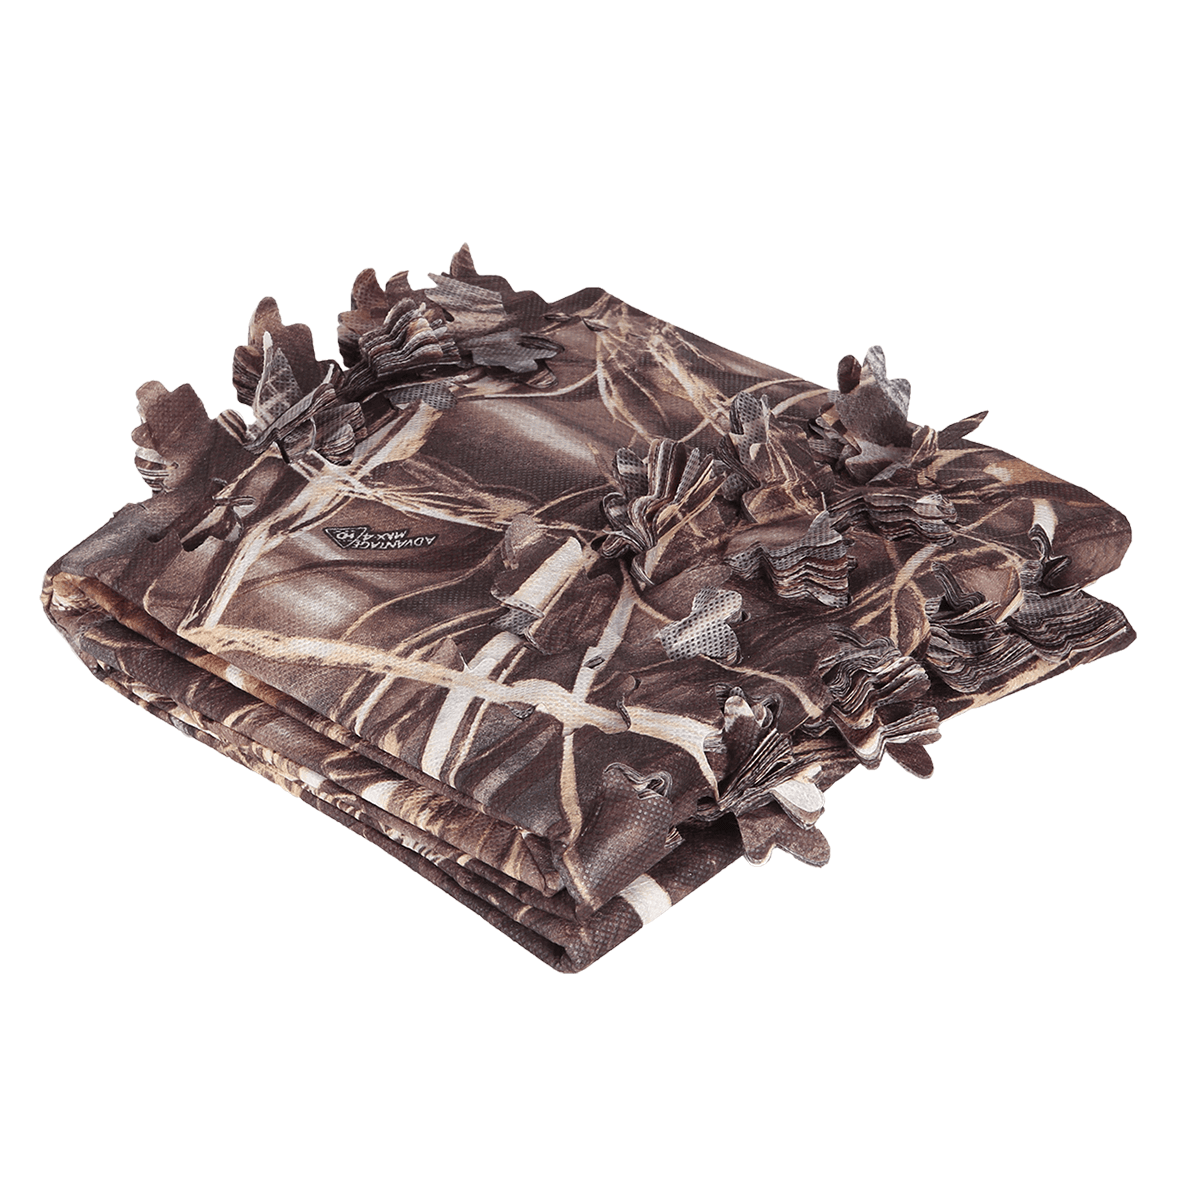 Amersitep 3d Camo Netting - Realtree MAX-5 - Goose Hunting